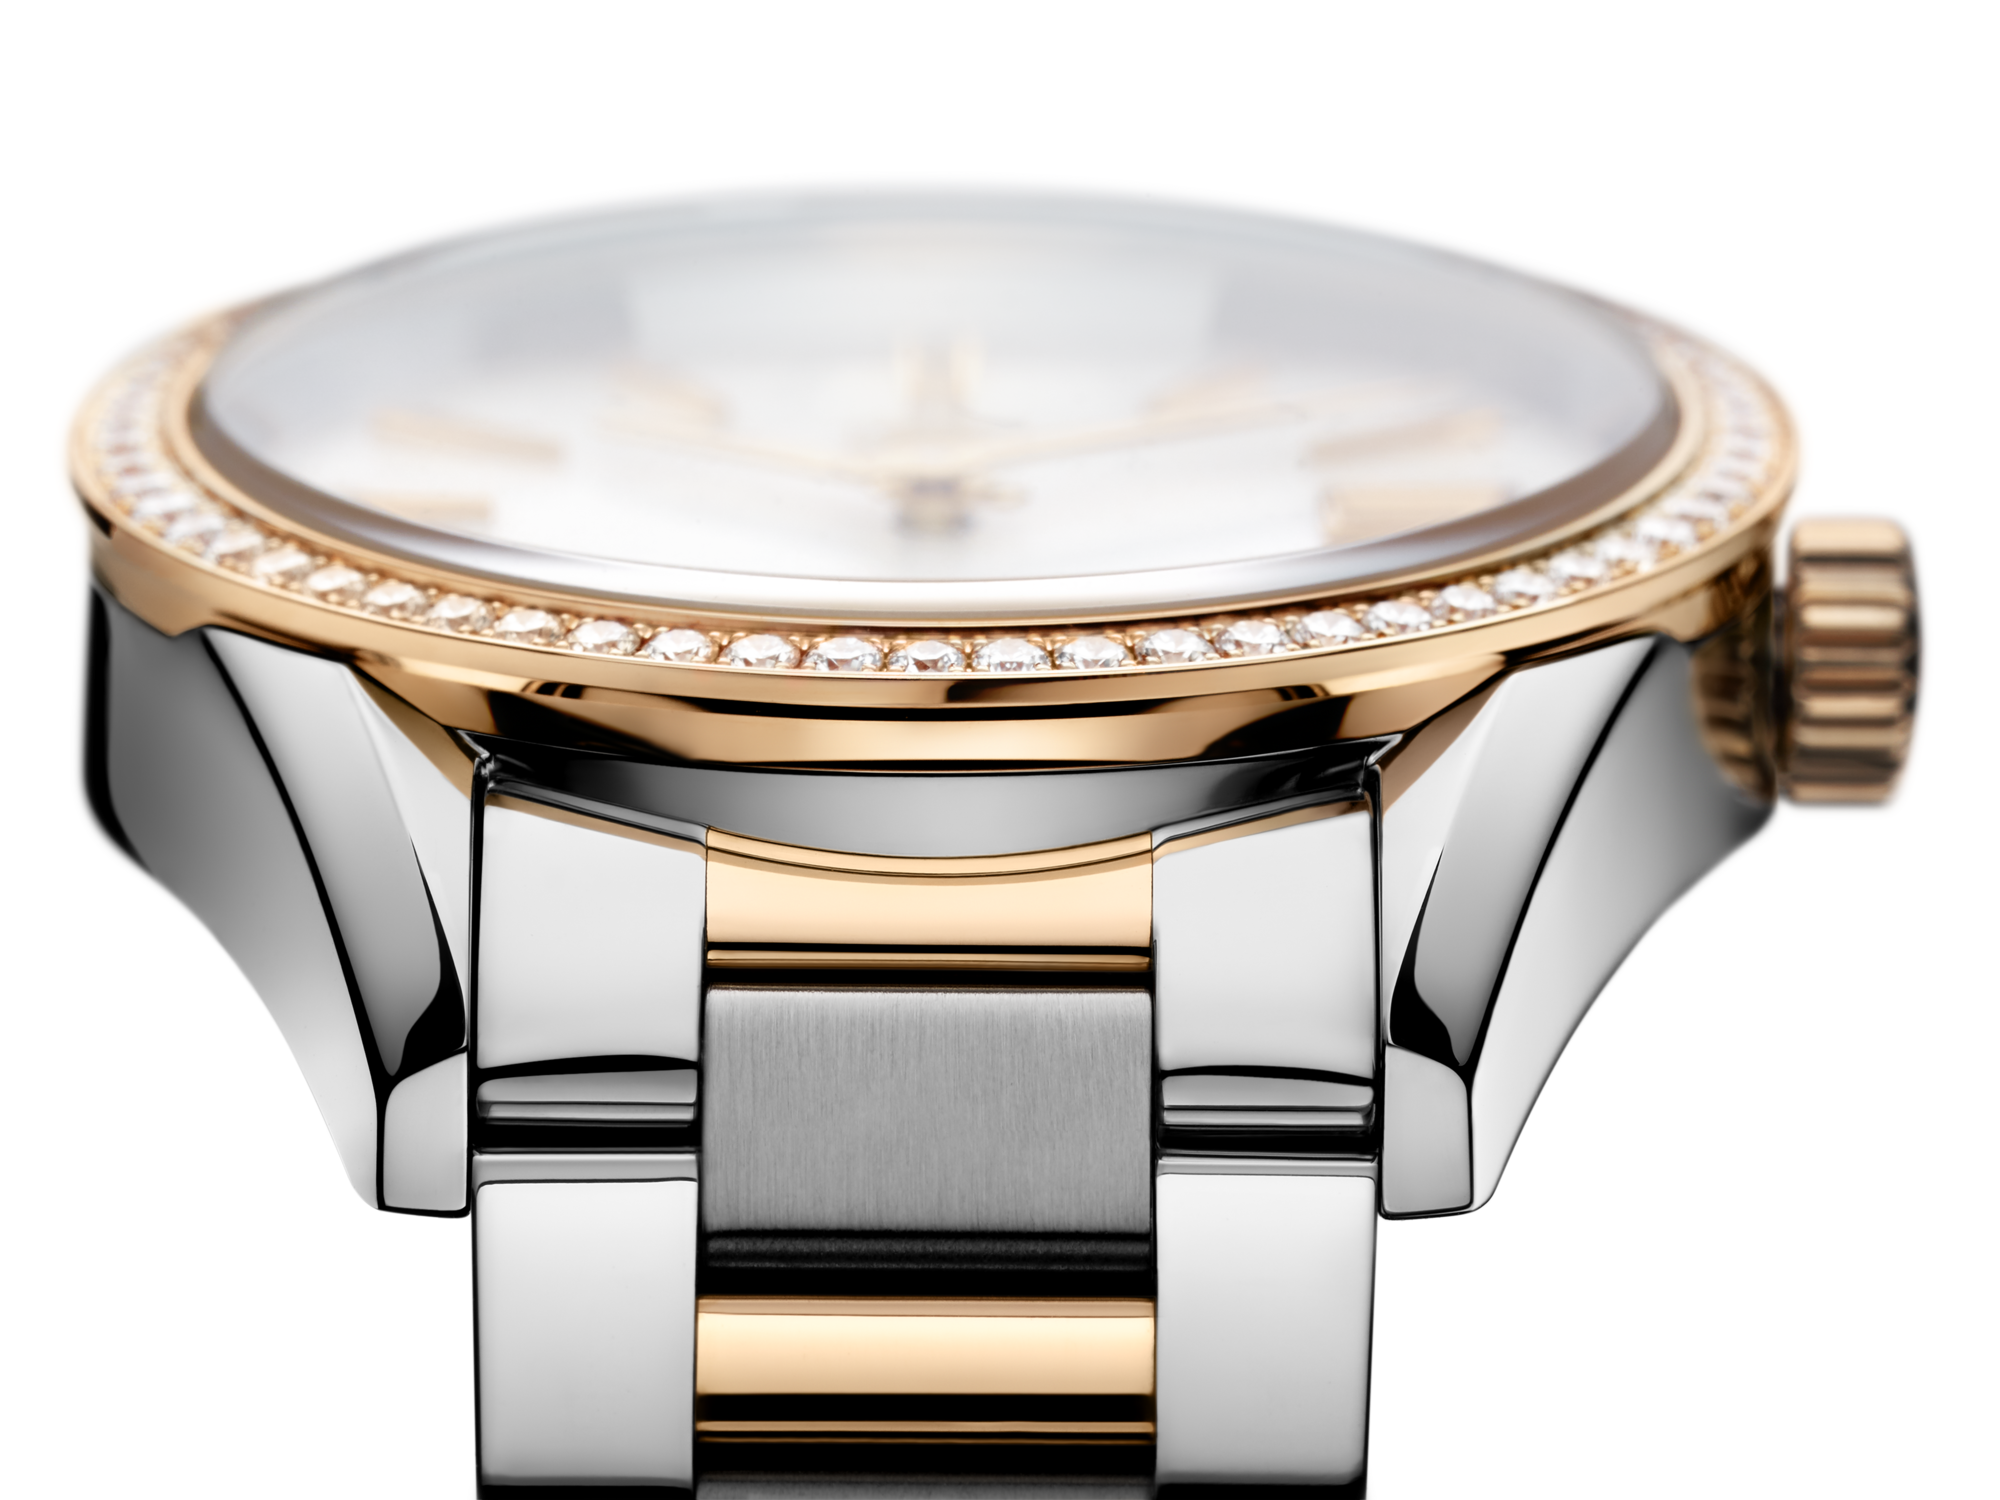 TAG Heuer Link Automatic Movement Silver Dial Ladies Watch Wat2312.ba0956TAG Heuer Link Automatic Pink Gold (18K),Stainless Steel Men's Sports Watch CAT2050